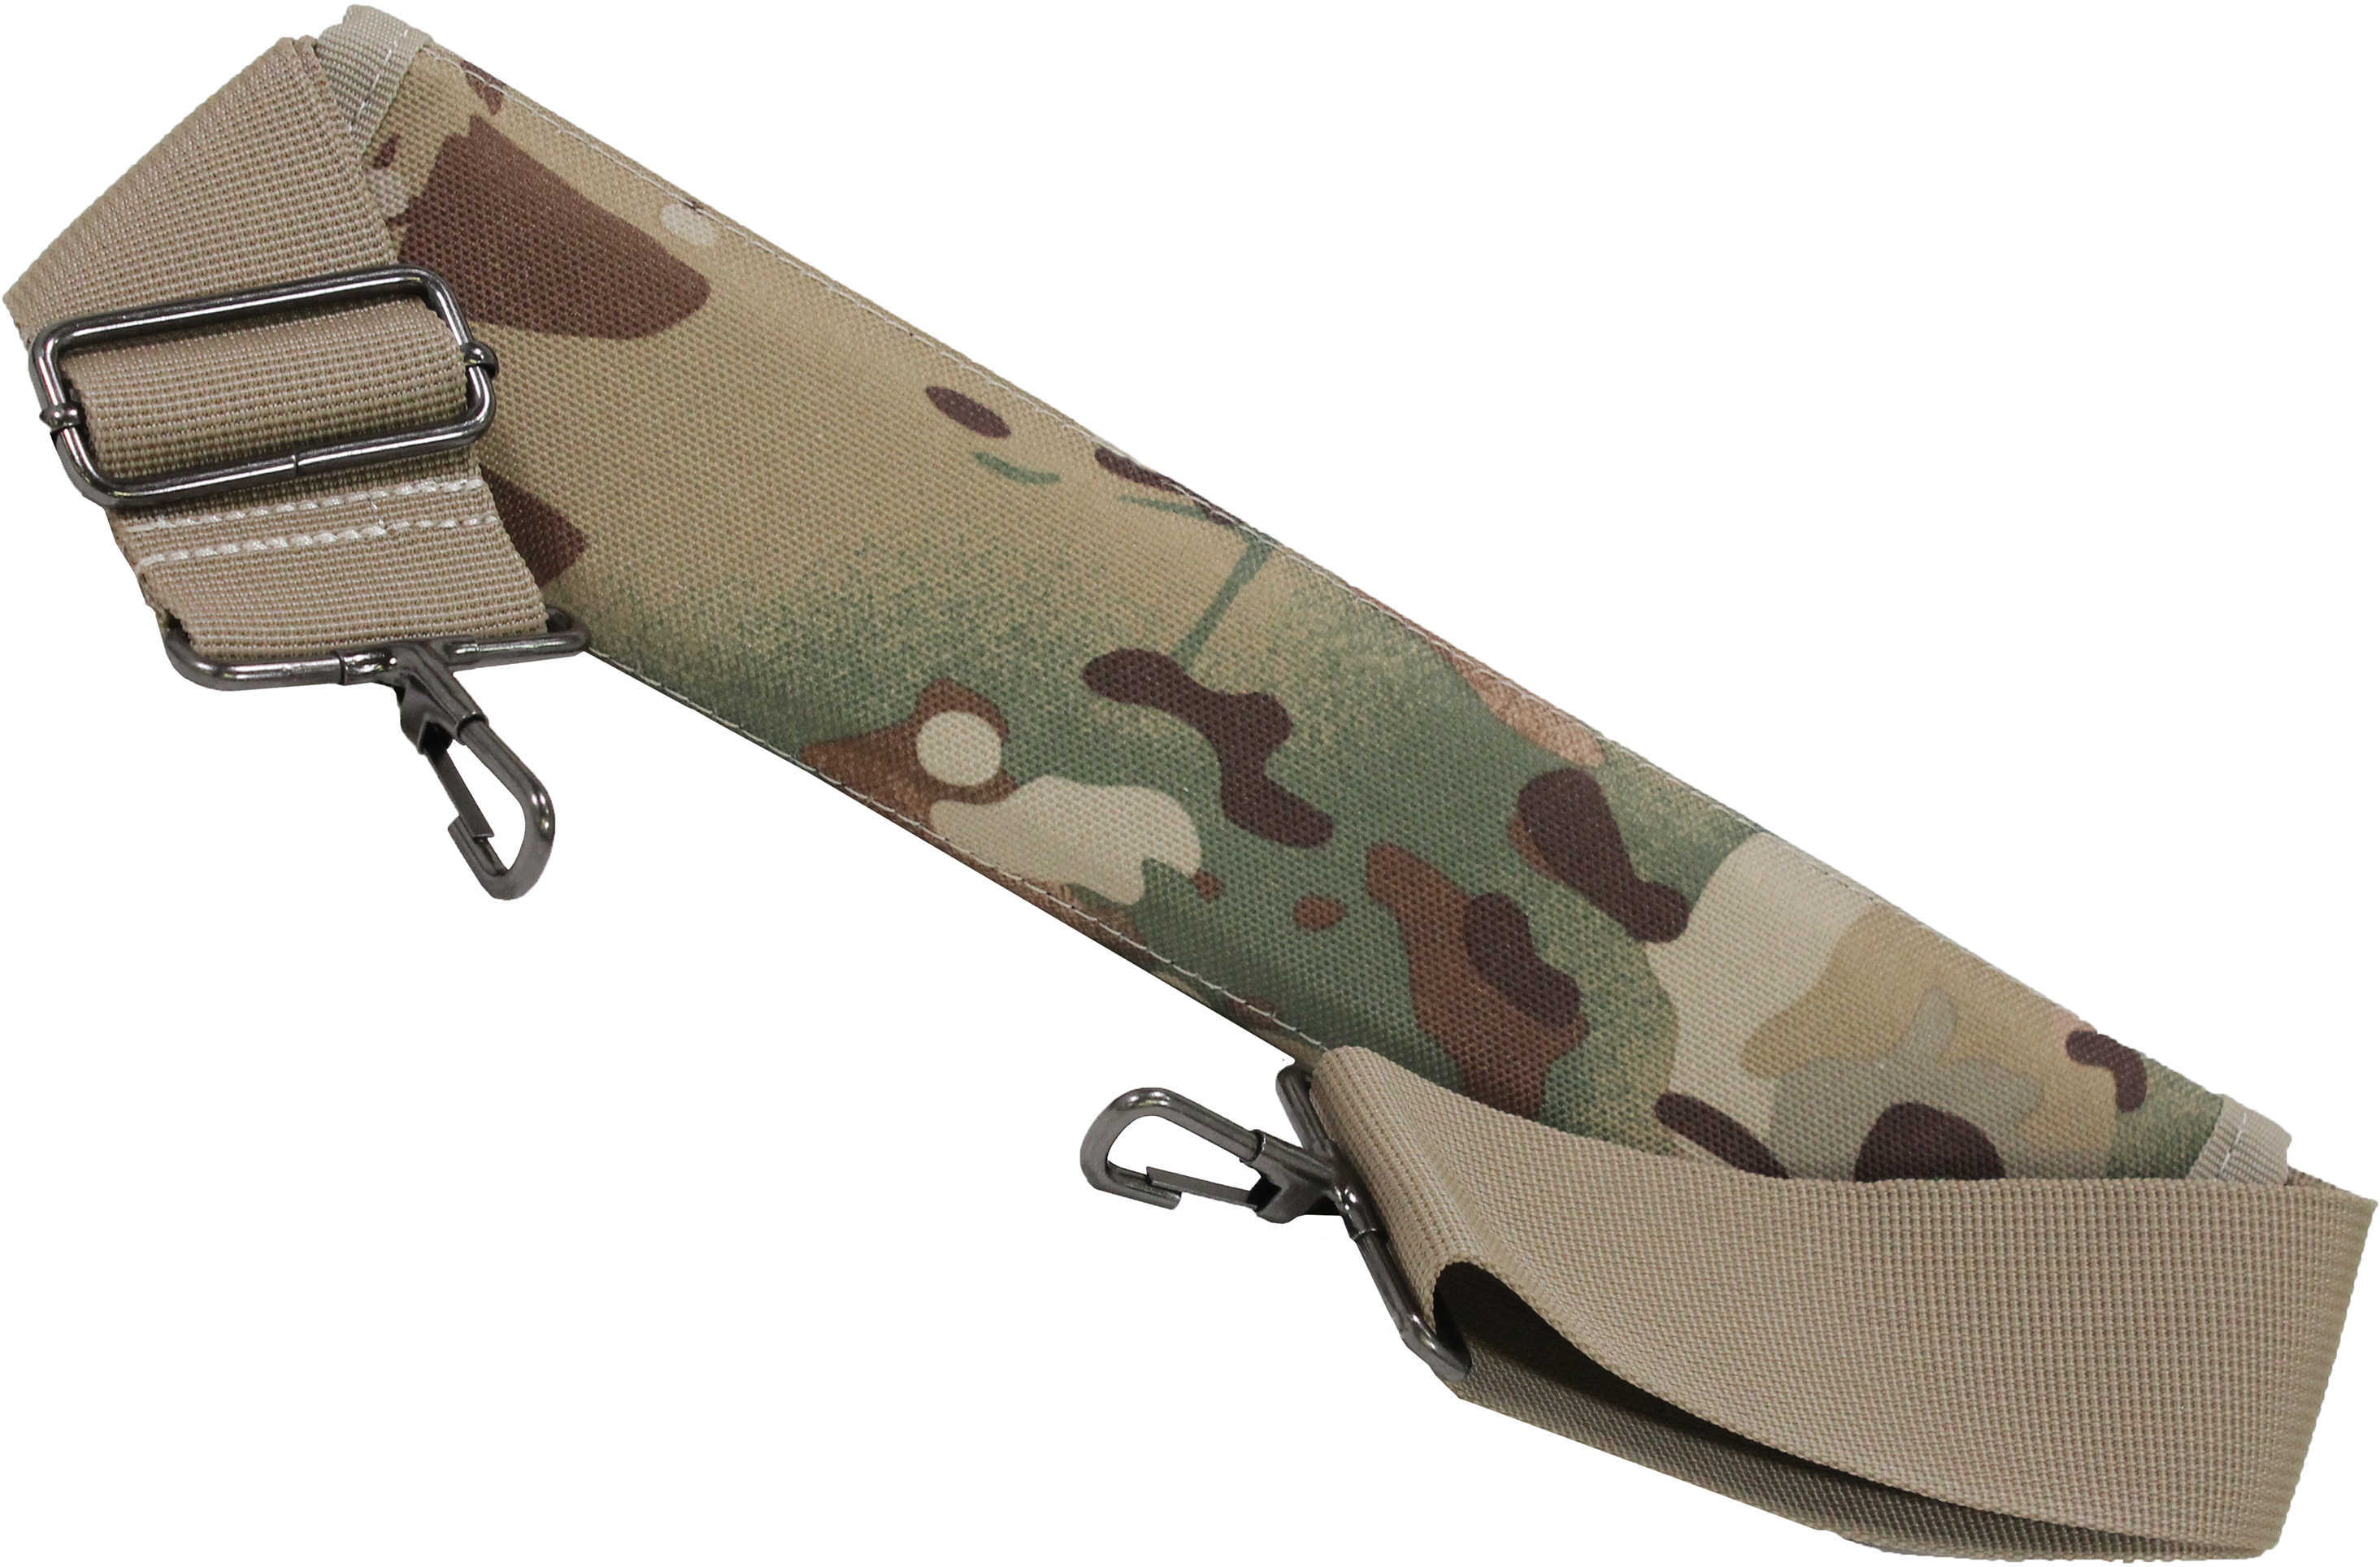 Galati Gear Padded Sling/Backpack Strap Multi Camouflage Md: GLSP46MC